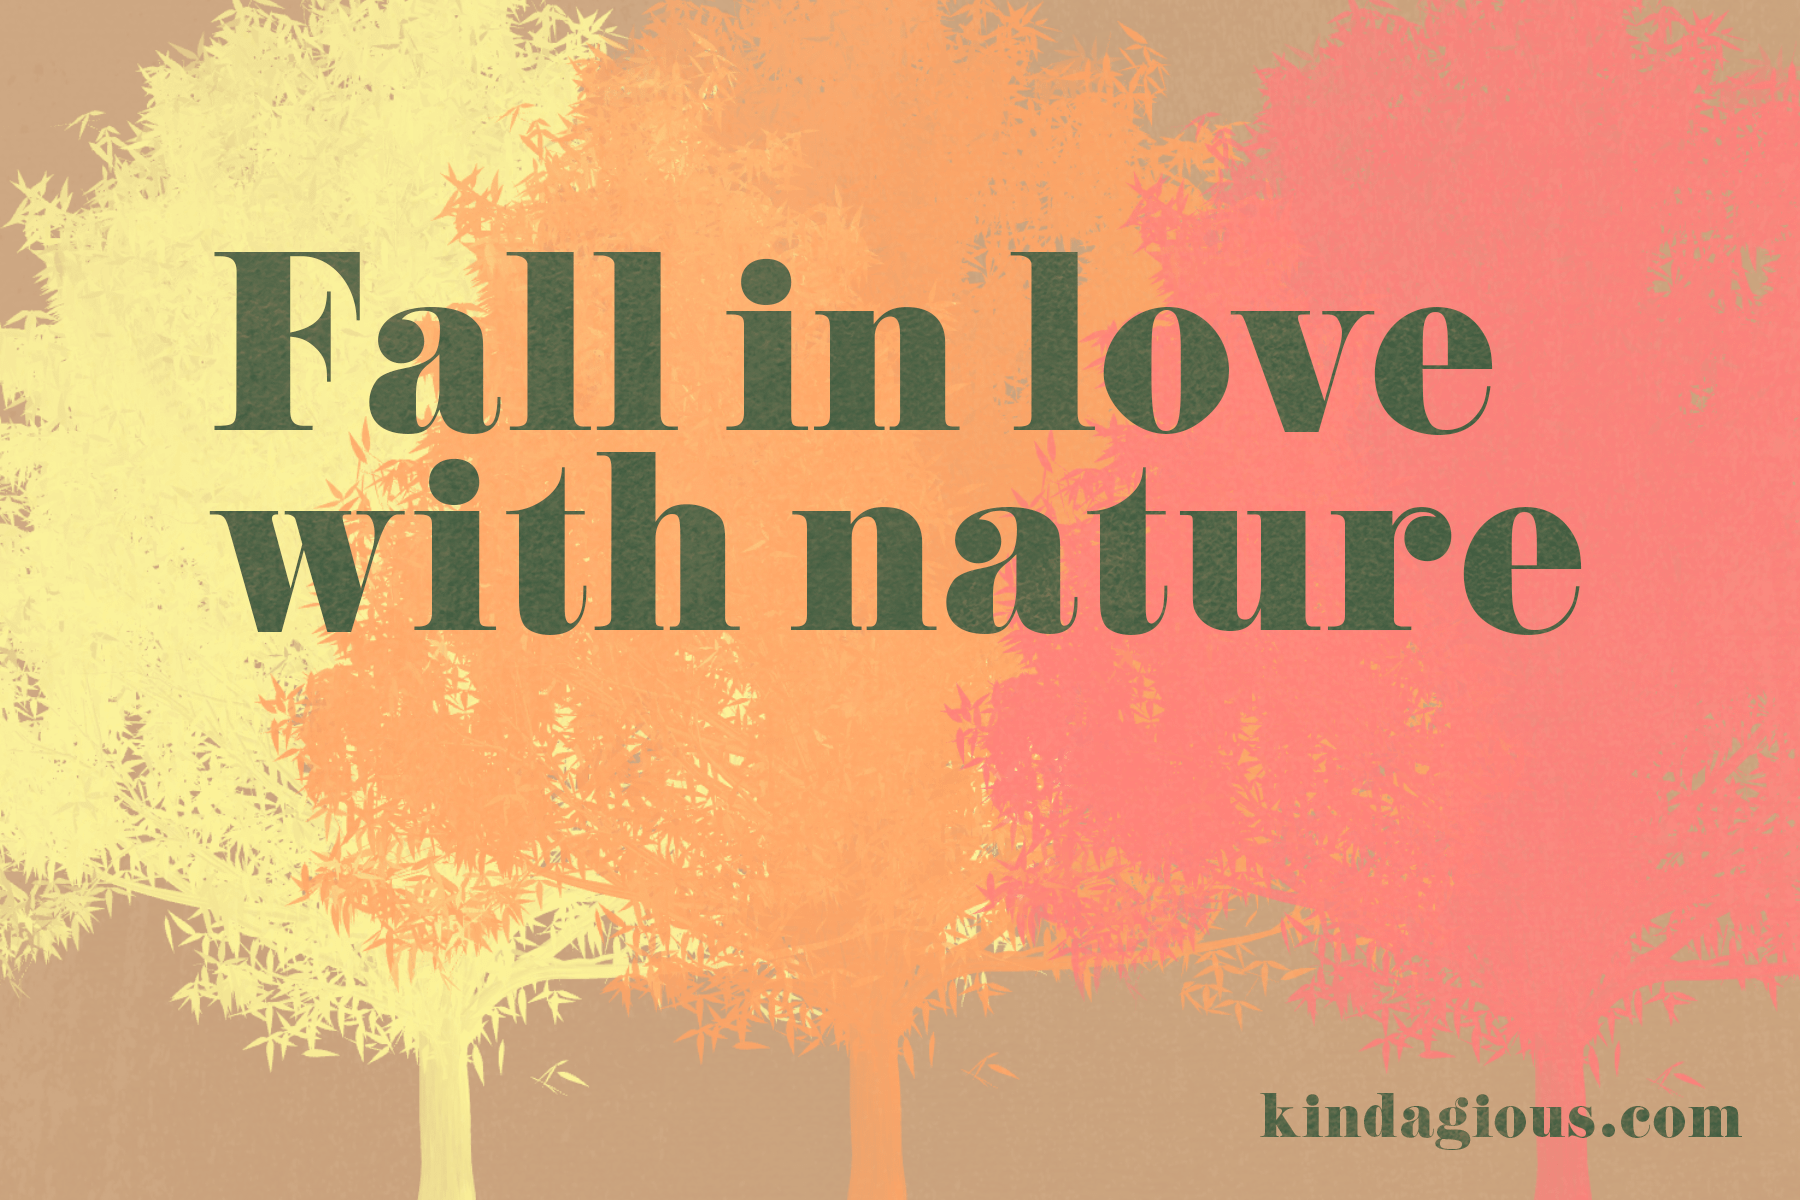 Fall in love with nature.